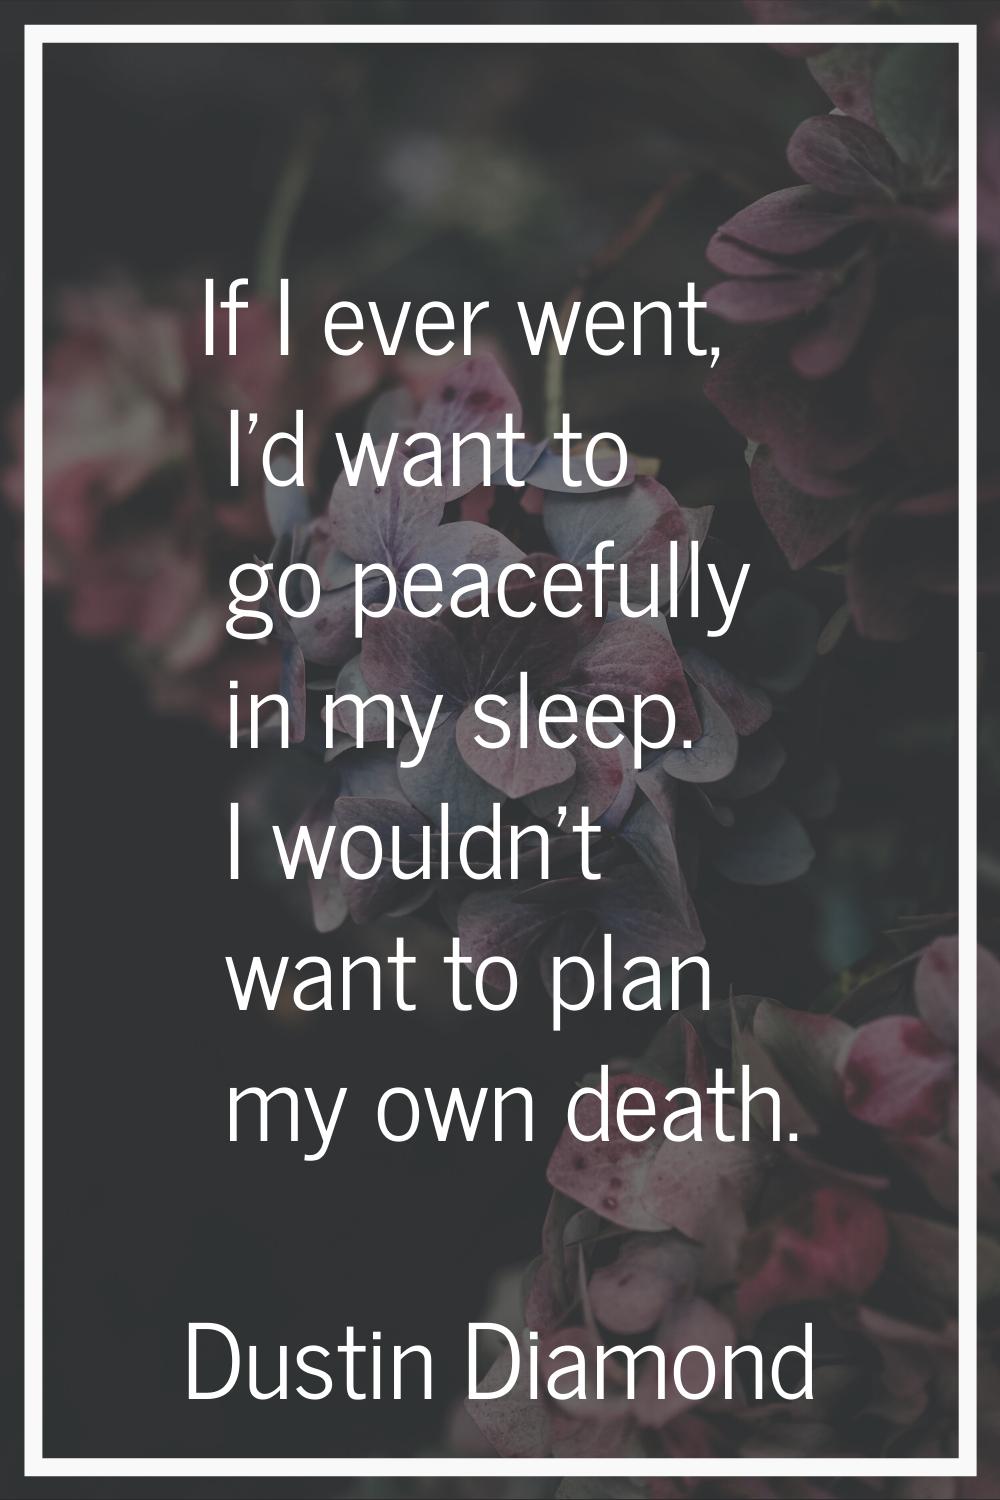 If I ever went, I'd want to go peacefully in my sleep. I wouldn't want to plan my own death.